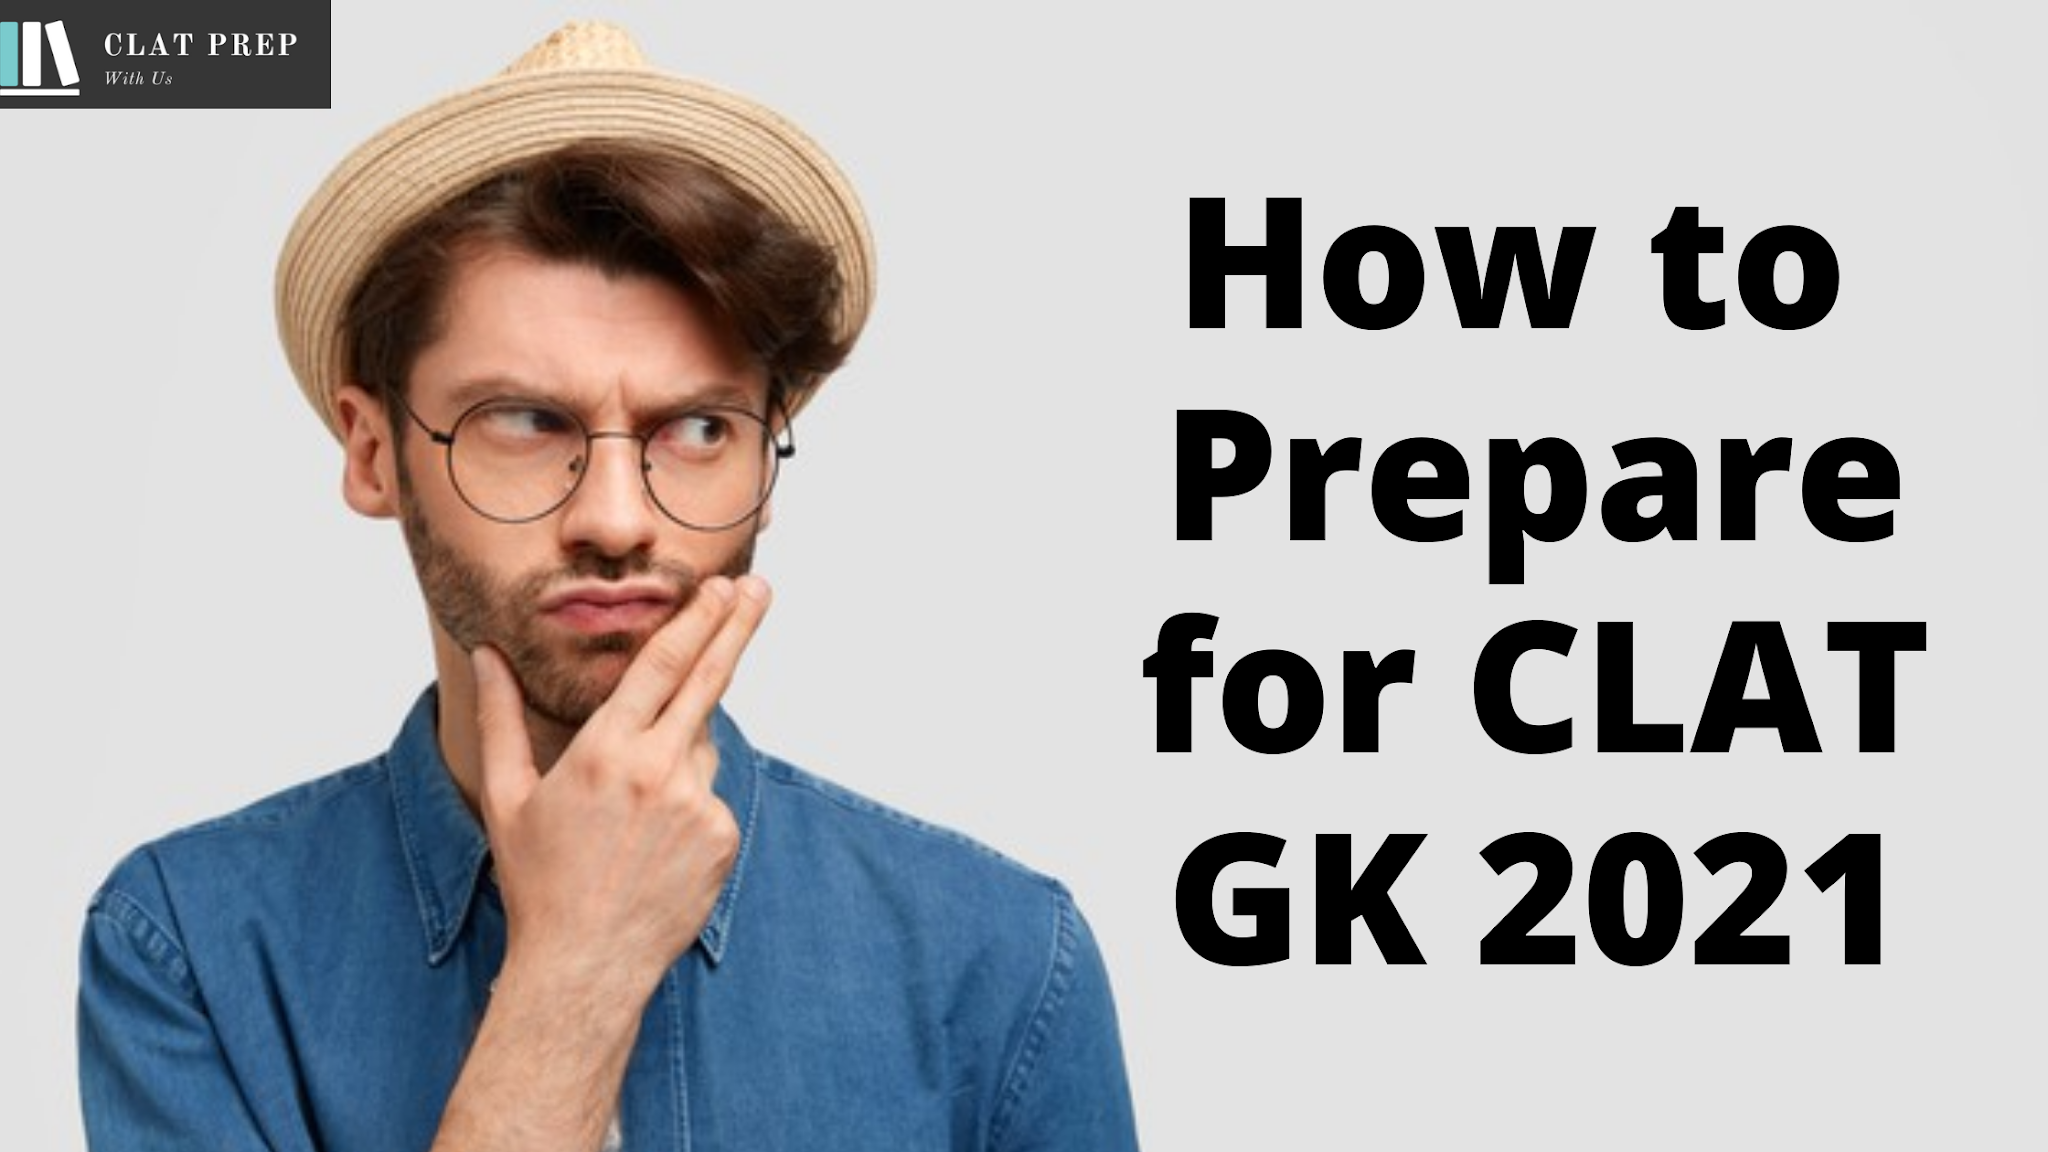 How to prepare for CLAT gk